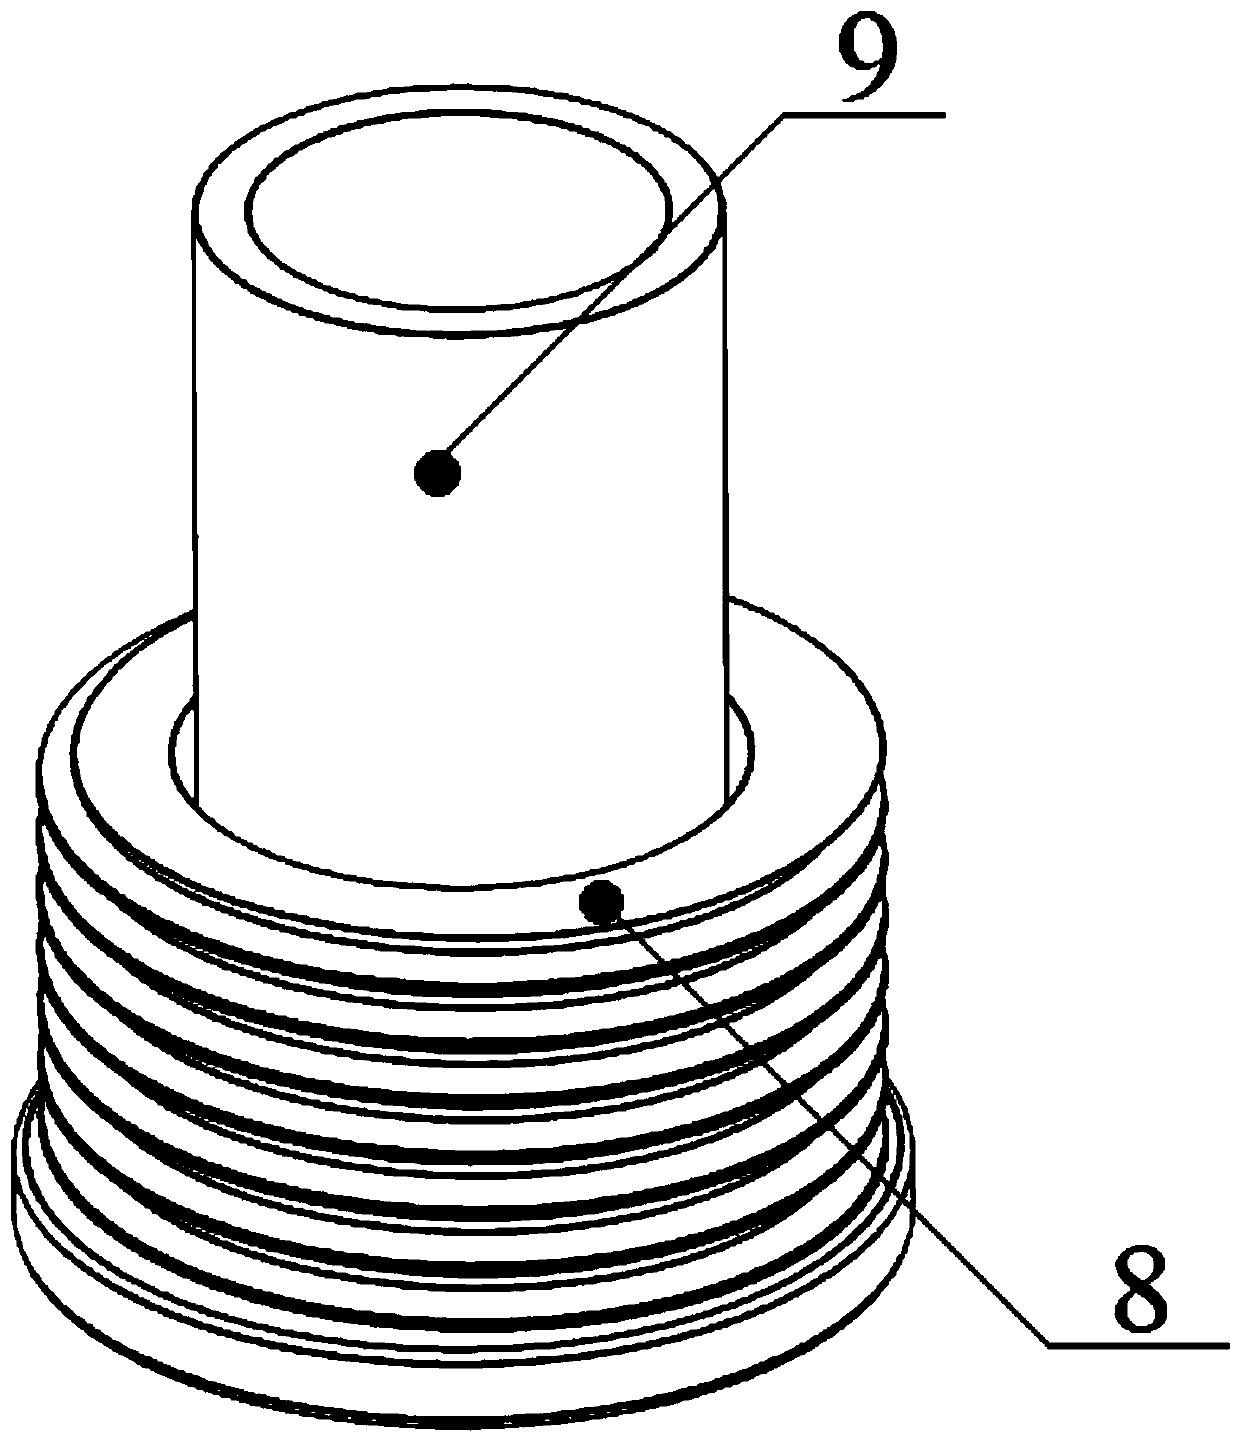 Automatic feeding and copper cap screwing device